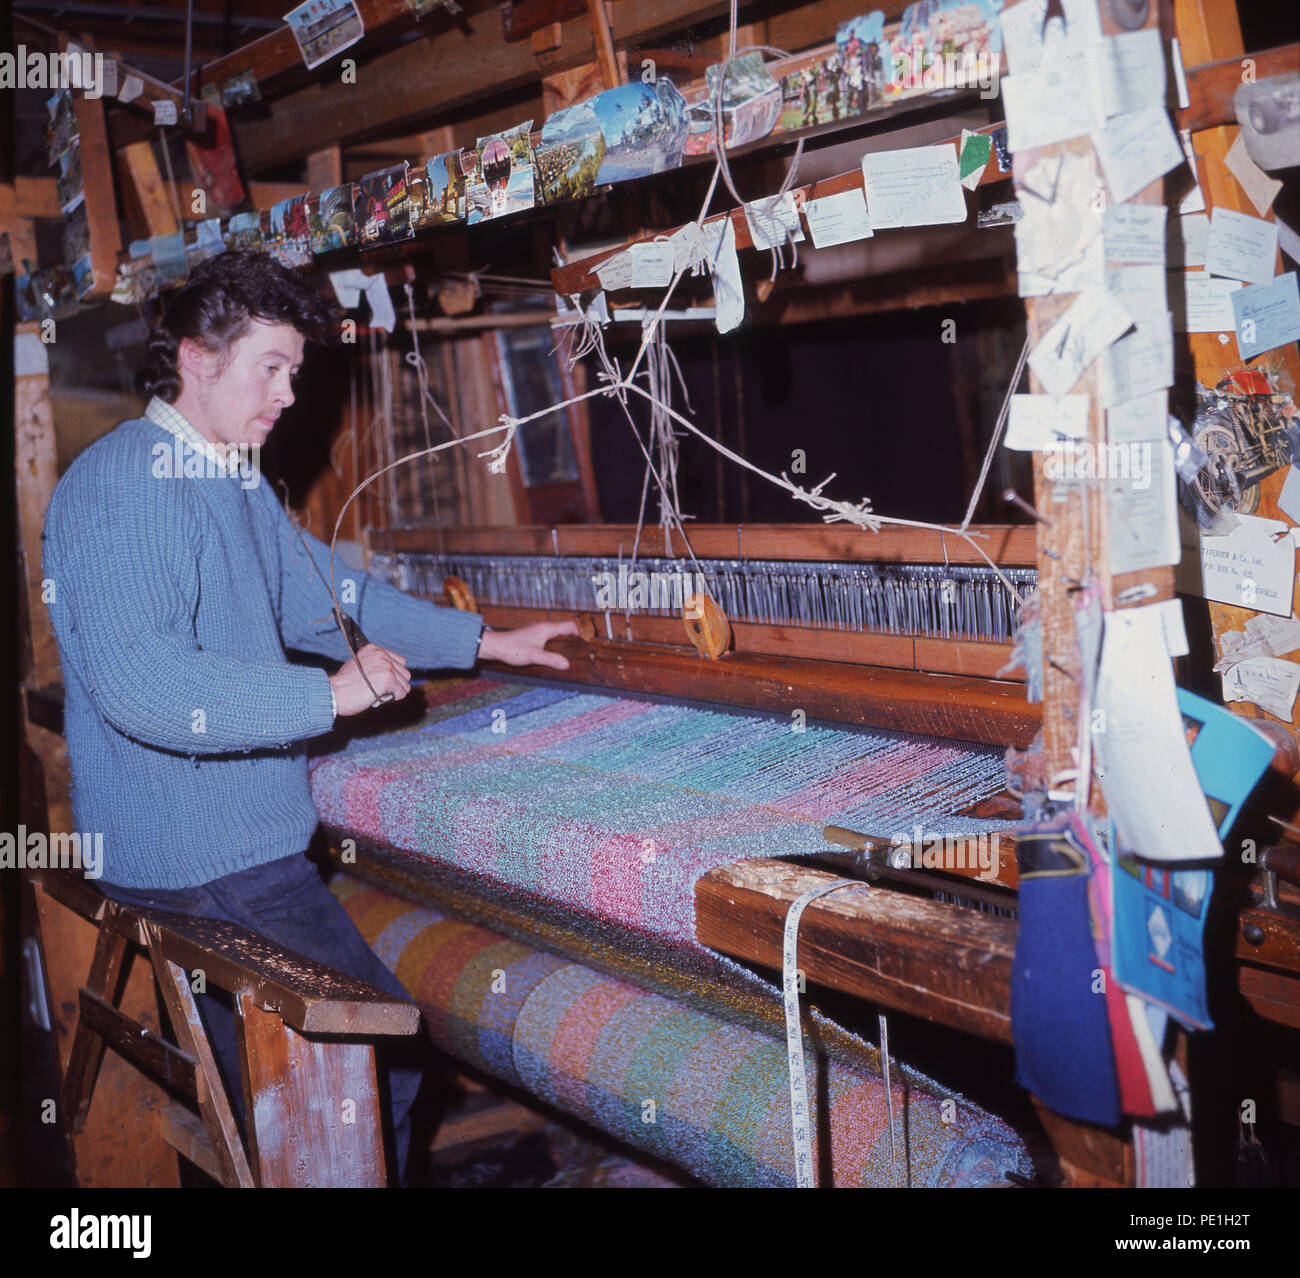 1960s, man weaving mohair cloth by hand on a wooden loom, Grasmere, Cumbria. A silk-life fabric or yarn, mohair is made from the hair of the Angora goat and as can be seen takes dyes well, to produce vibrant colourful garments. Stock Photo